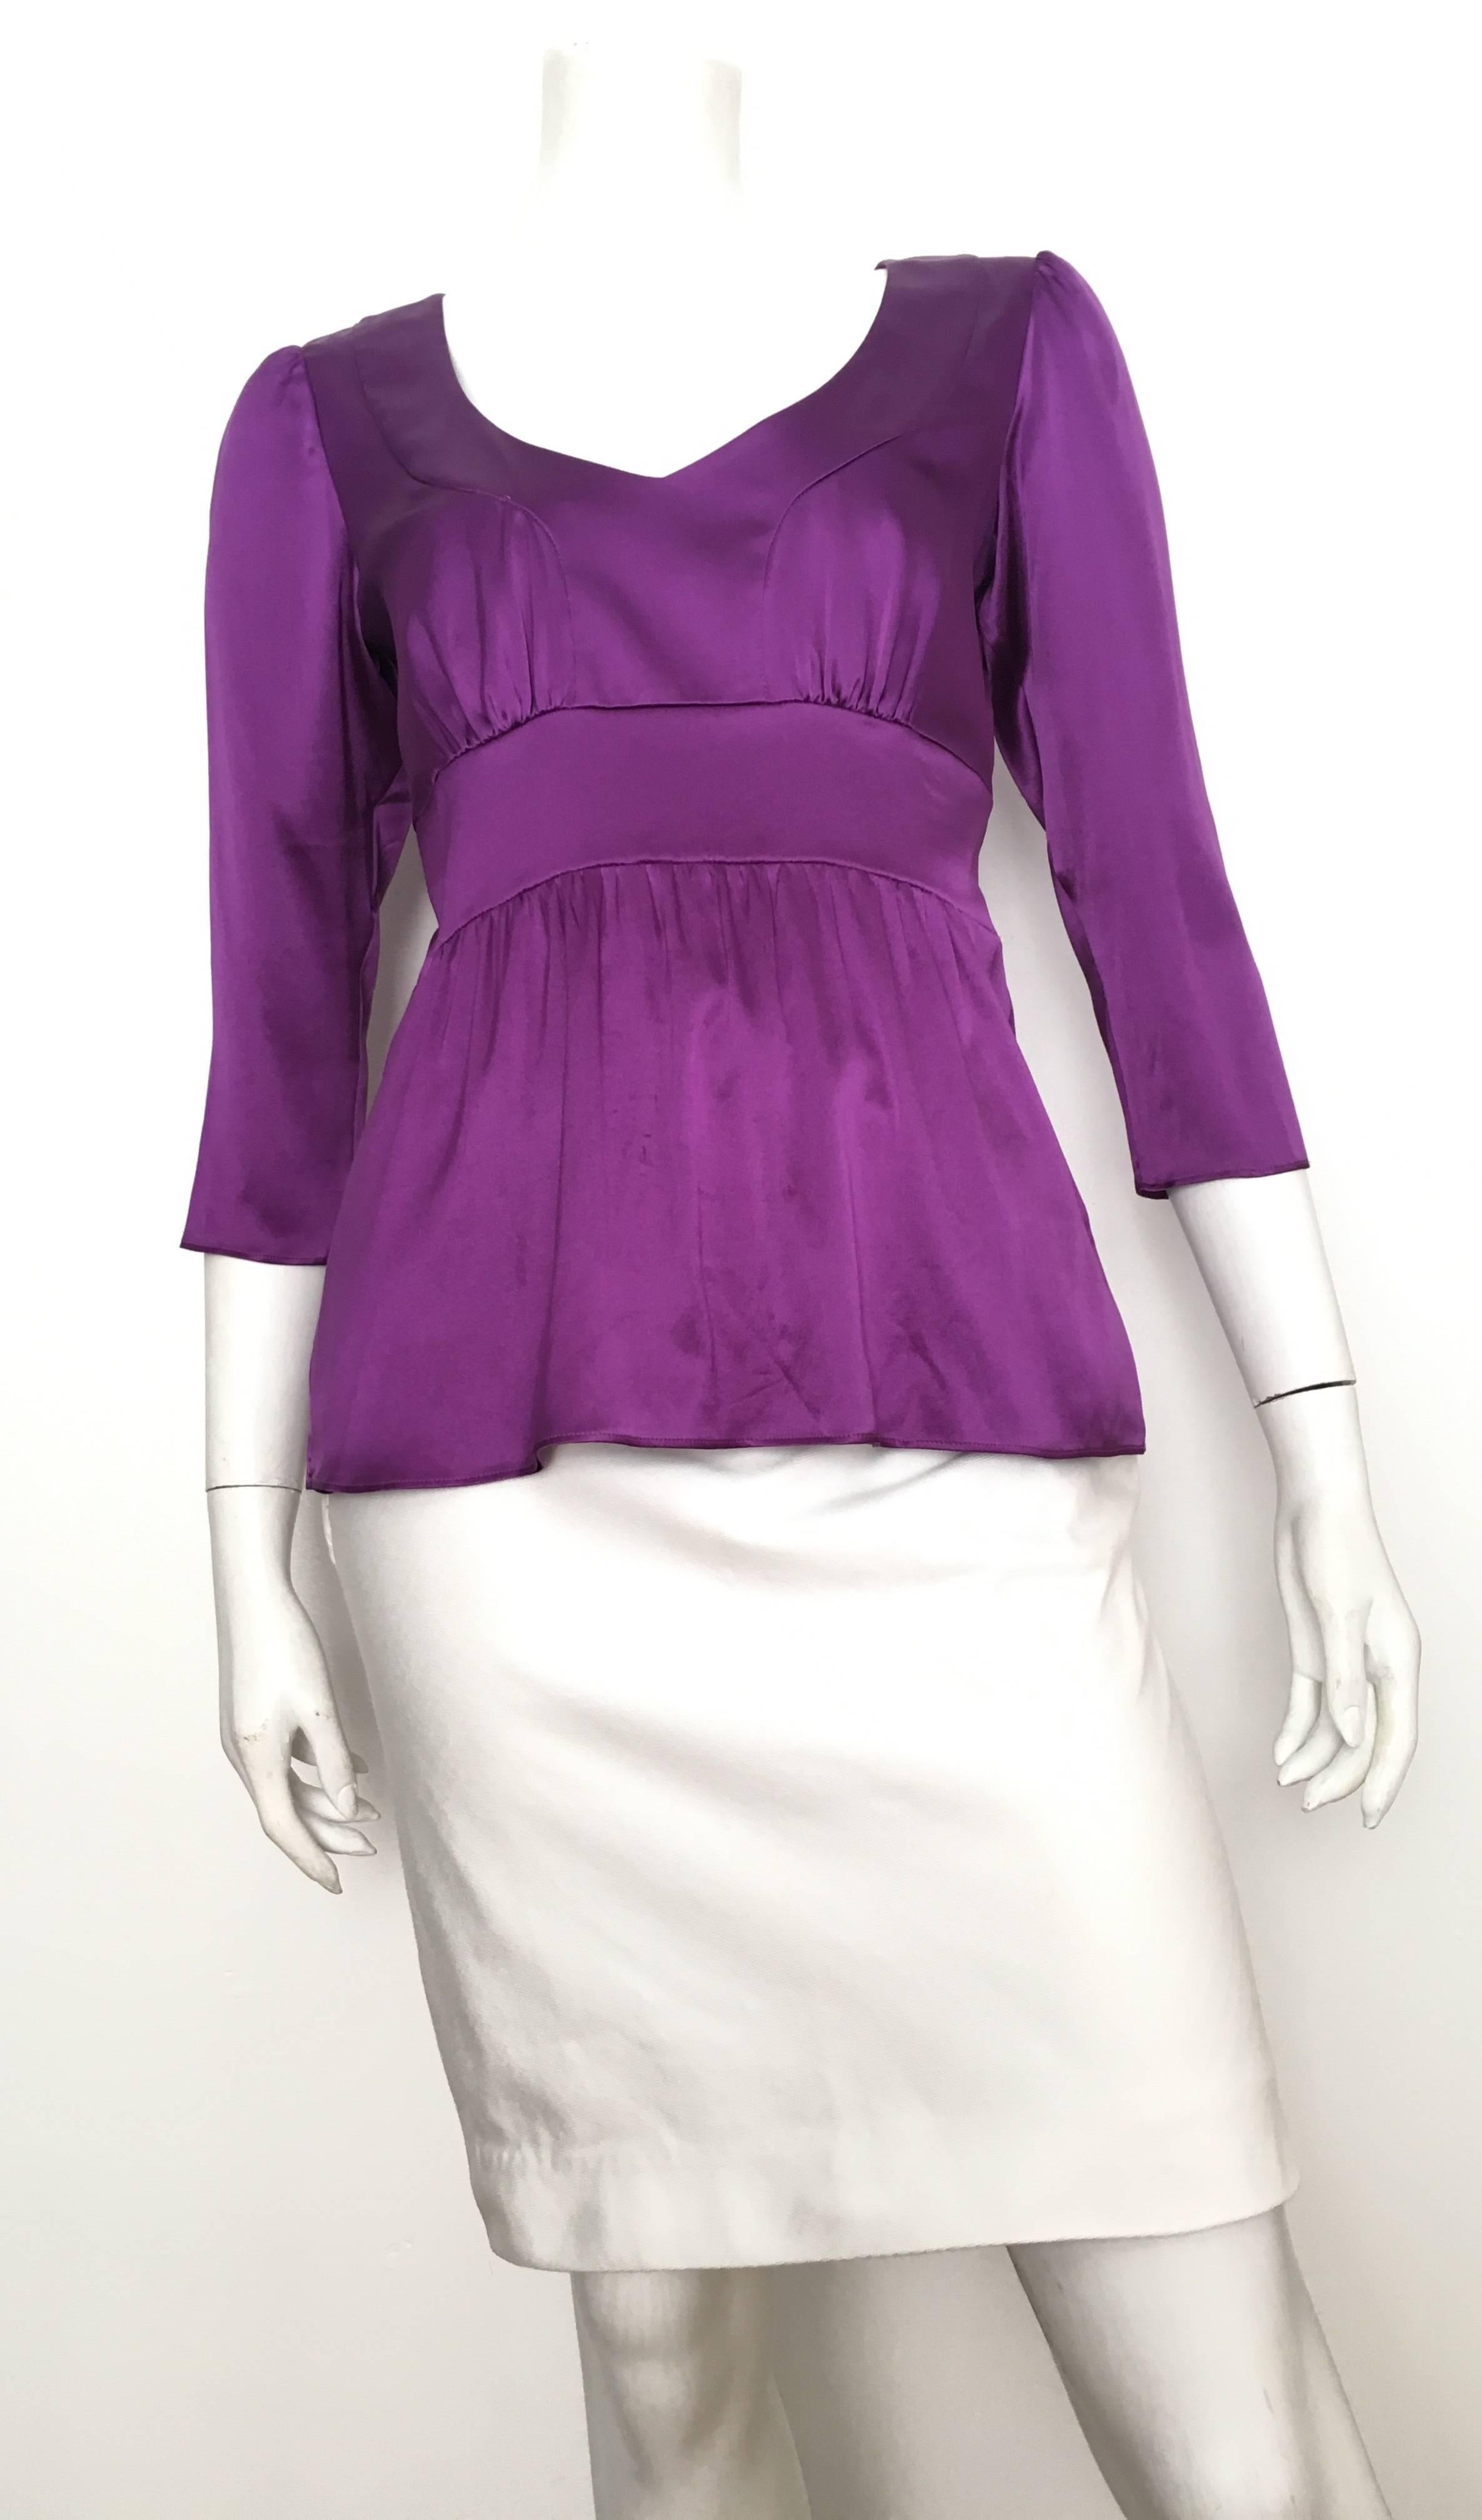 ETRO silk purple loose and flowing boho blouse is an Italian size 42 and fits like an USA size 6.
Low cut neckline and sleeves are 3/4 length.  This blouse does not have a zipper. 
Measurements are:
38" bust 97cm
29" in waist area